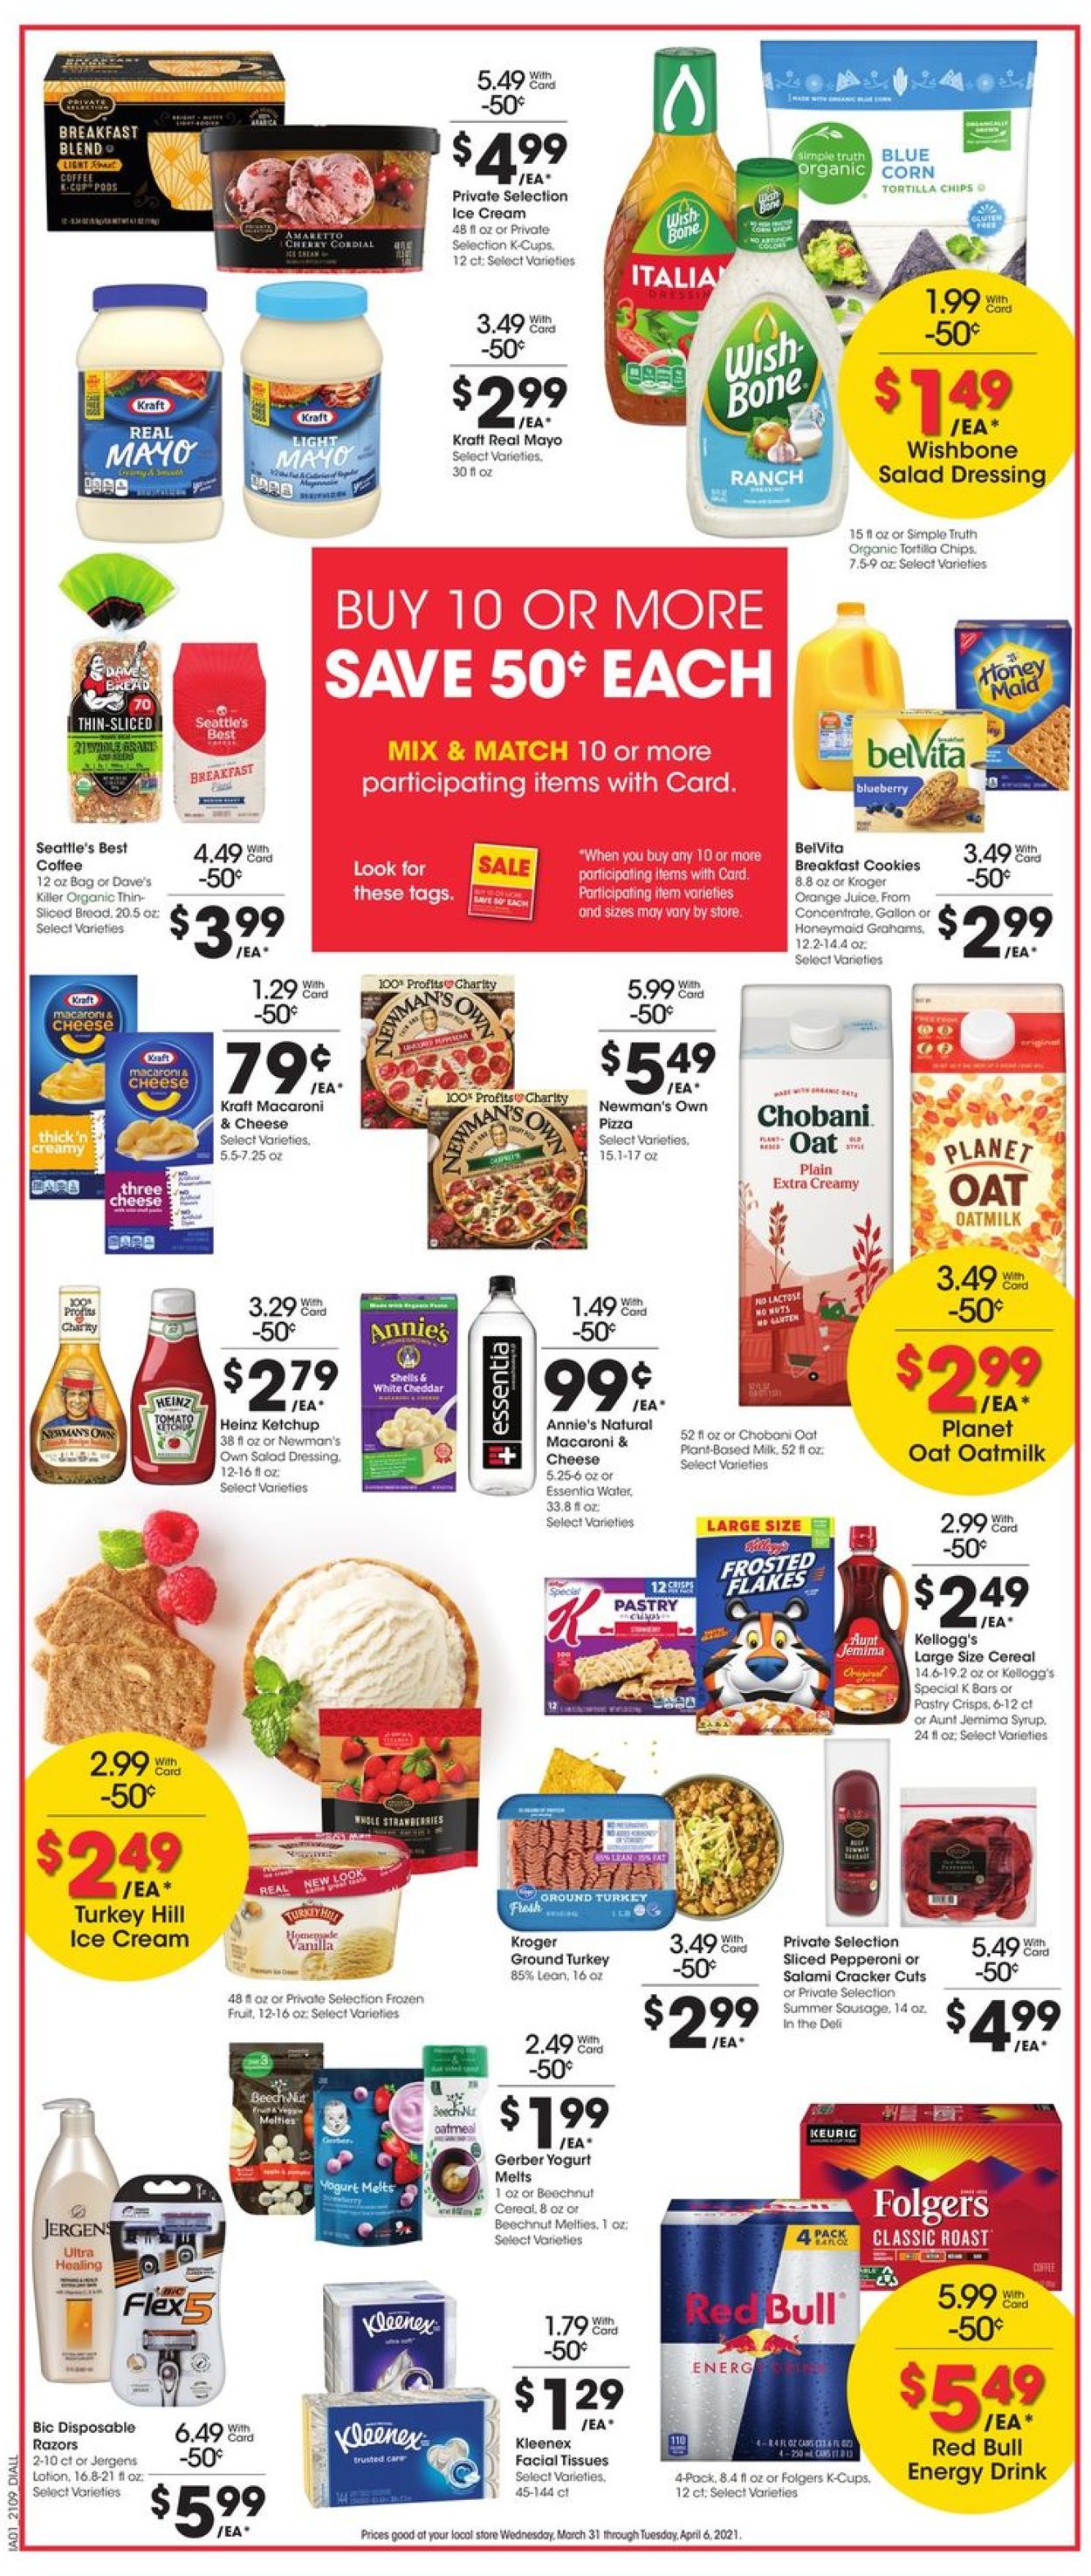 Baker's - Easter 2021 ad Weekly Ad Circular - valid 03/31-04/06/2021 (Page 4)